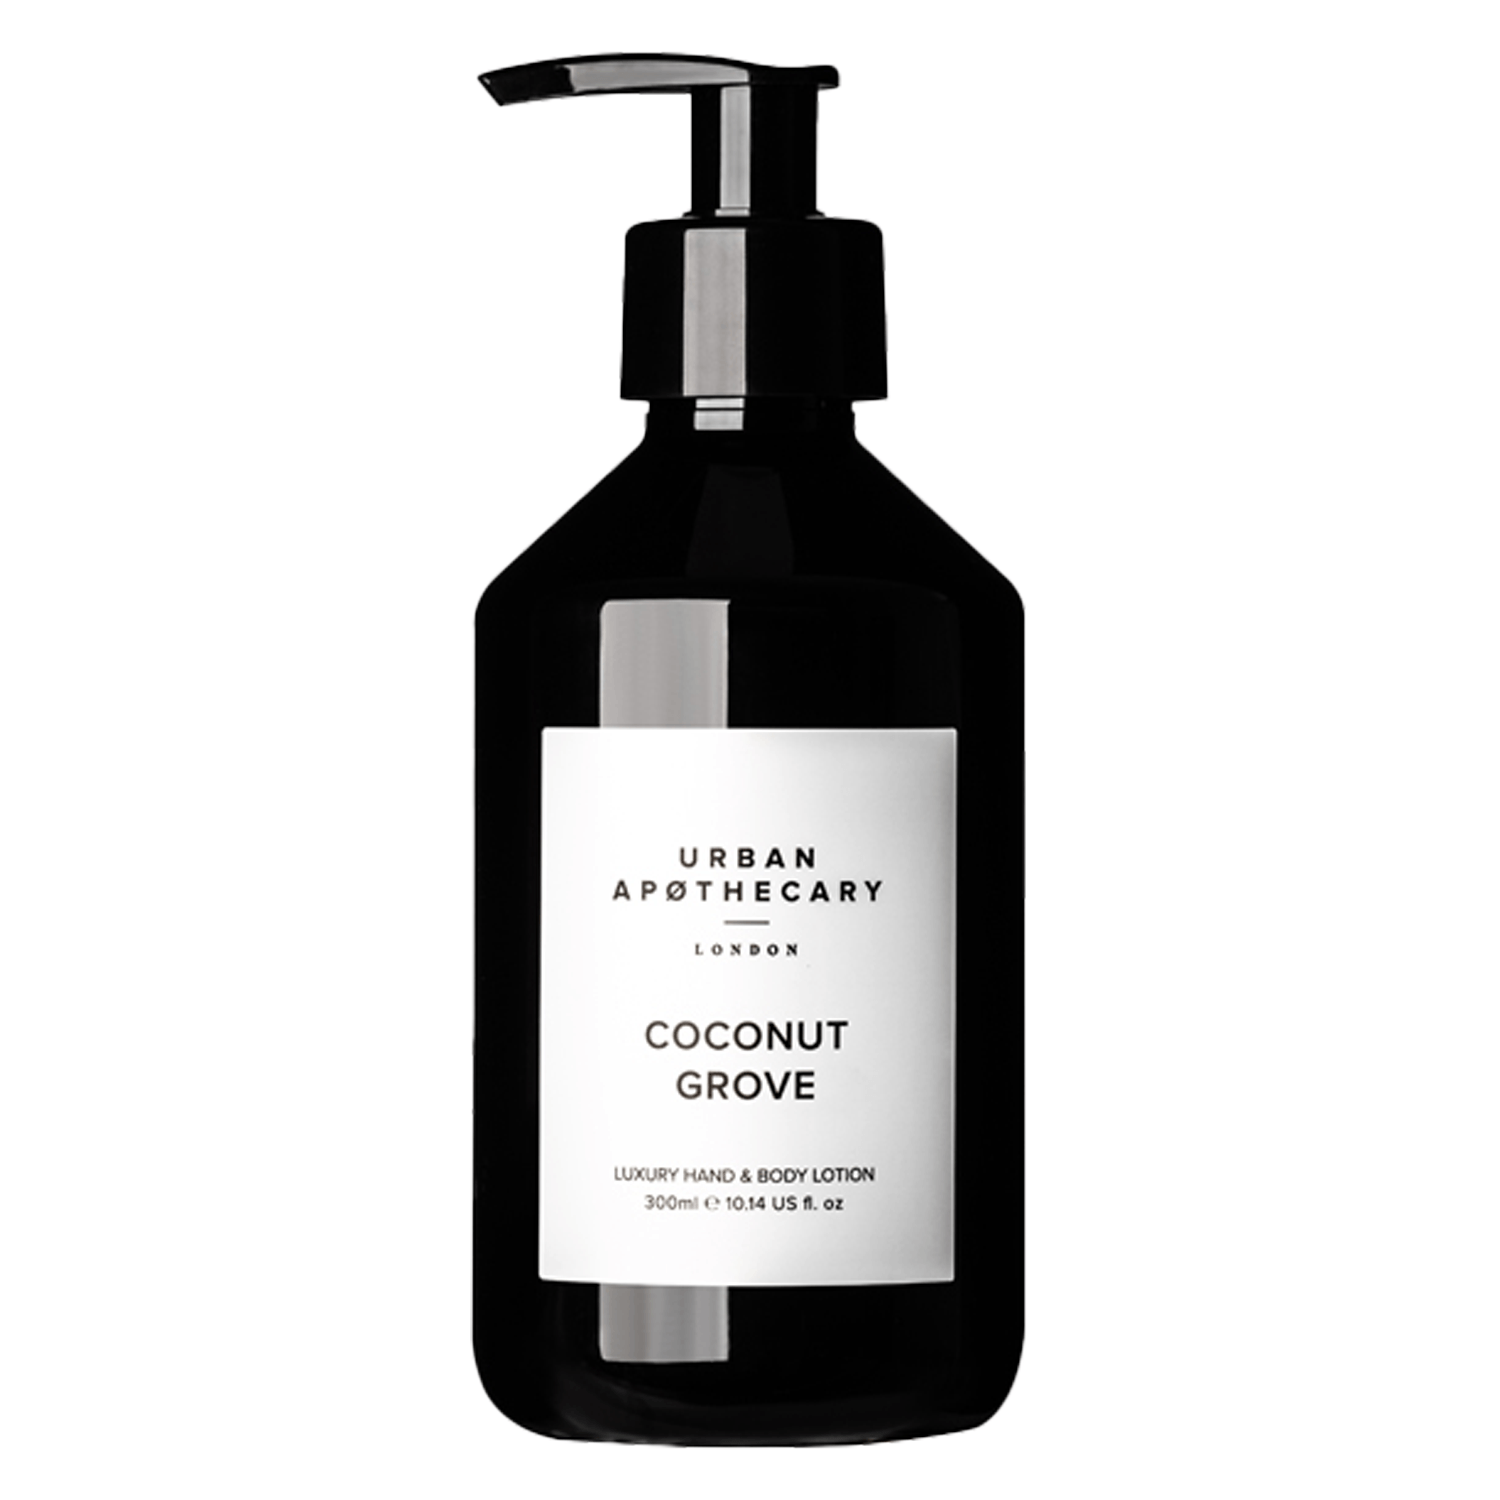 Product image from Urban Apothecary - Luxury Hand & Body Lotion Coconut Grove